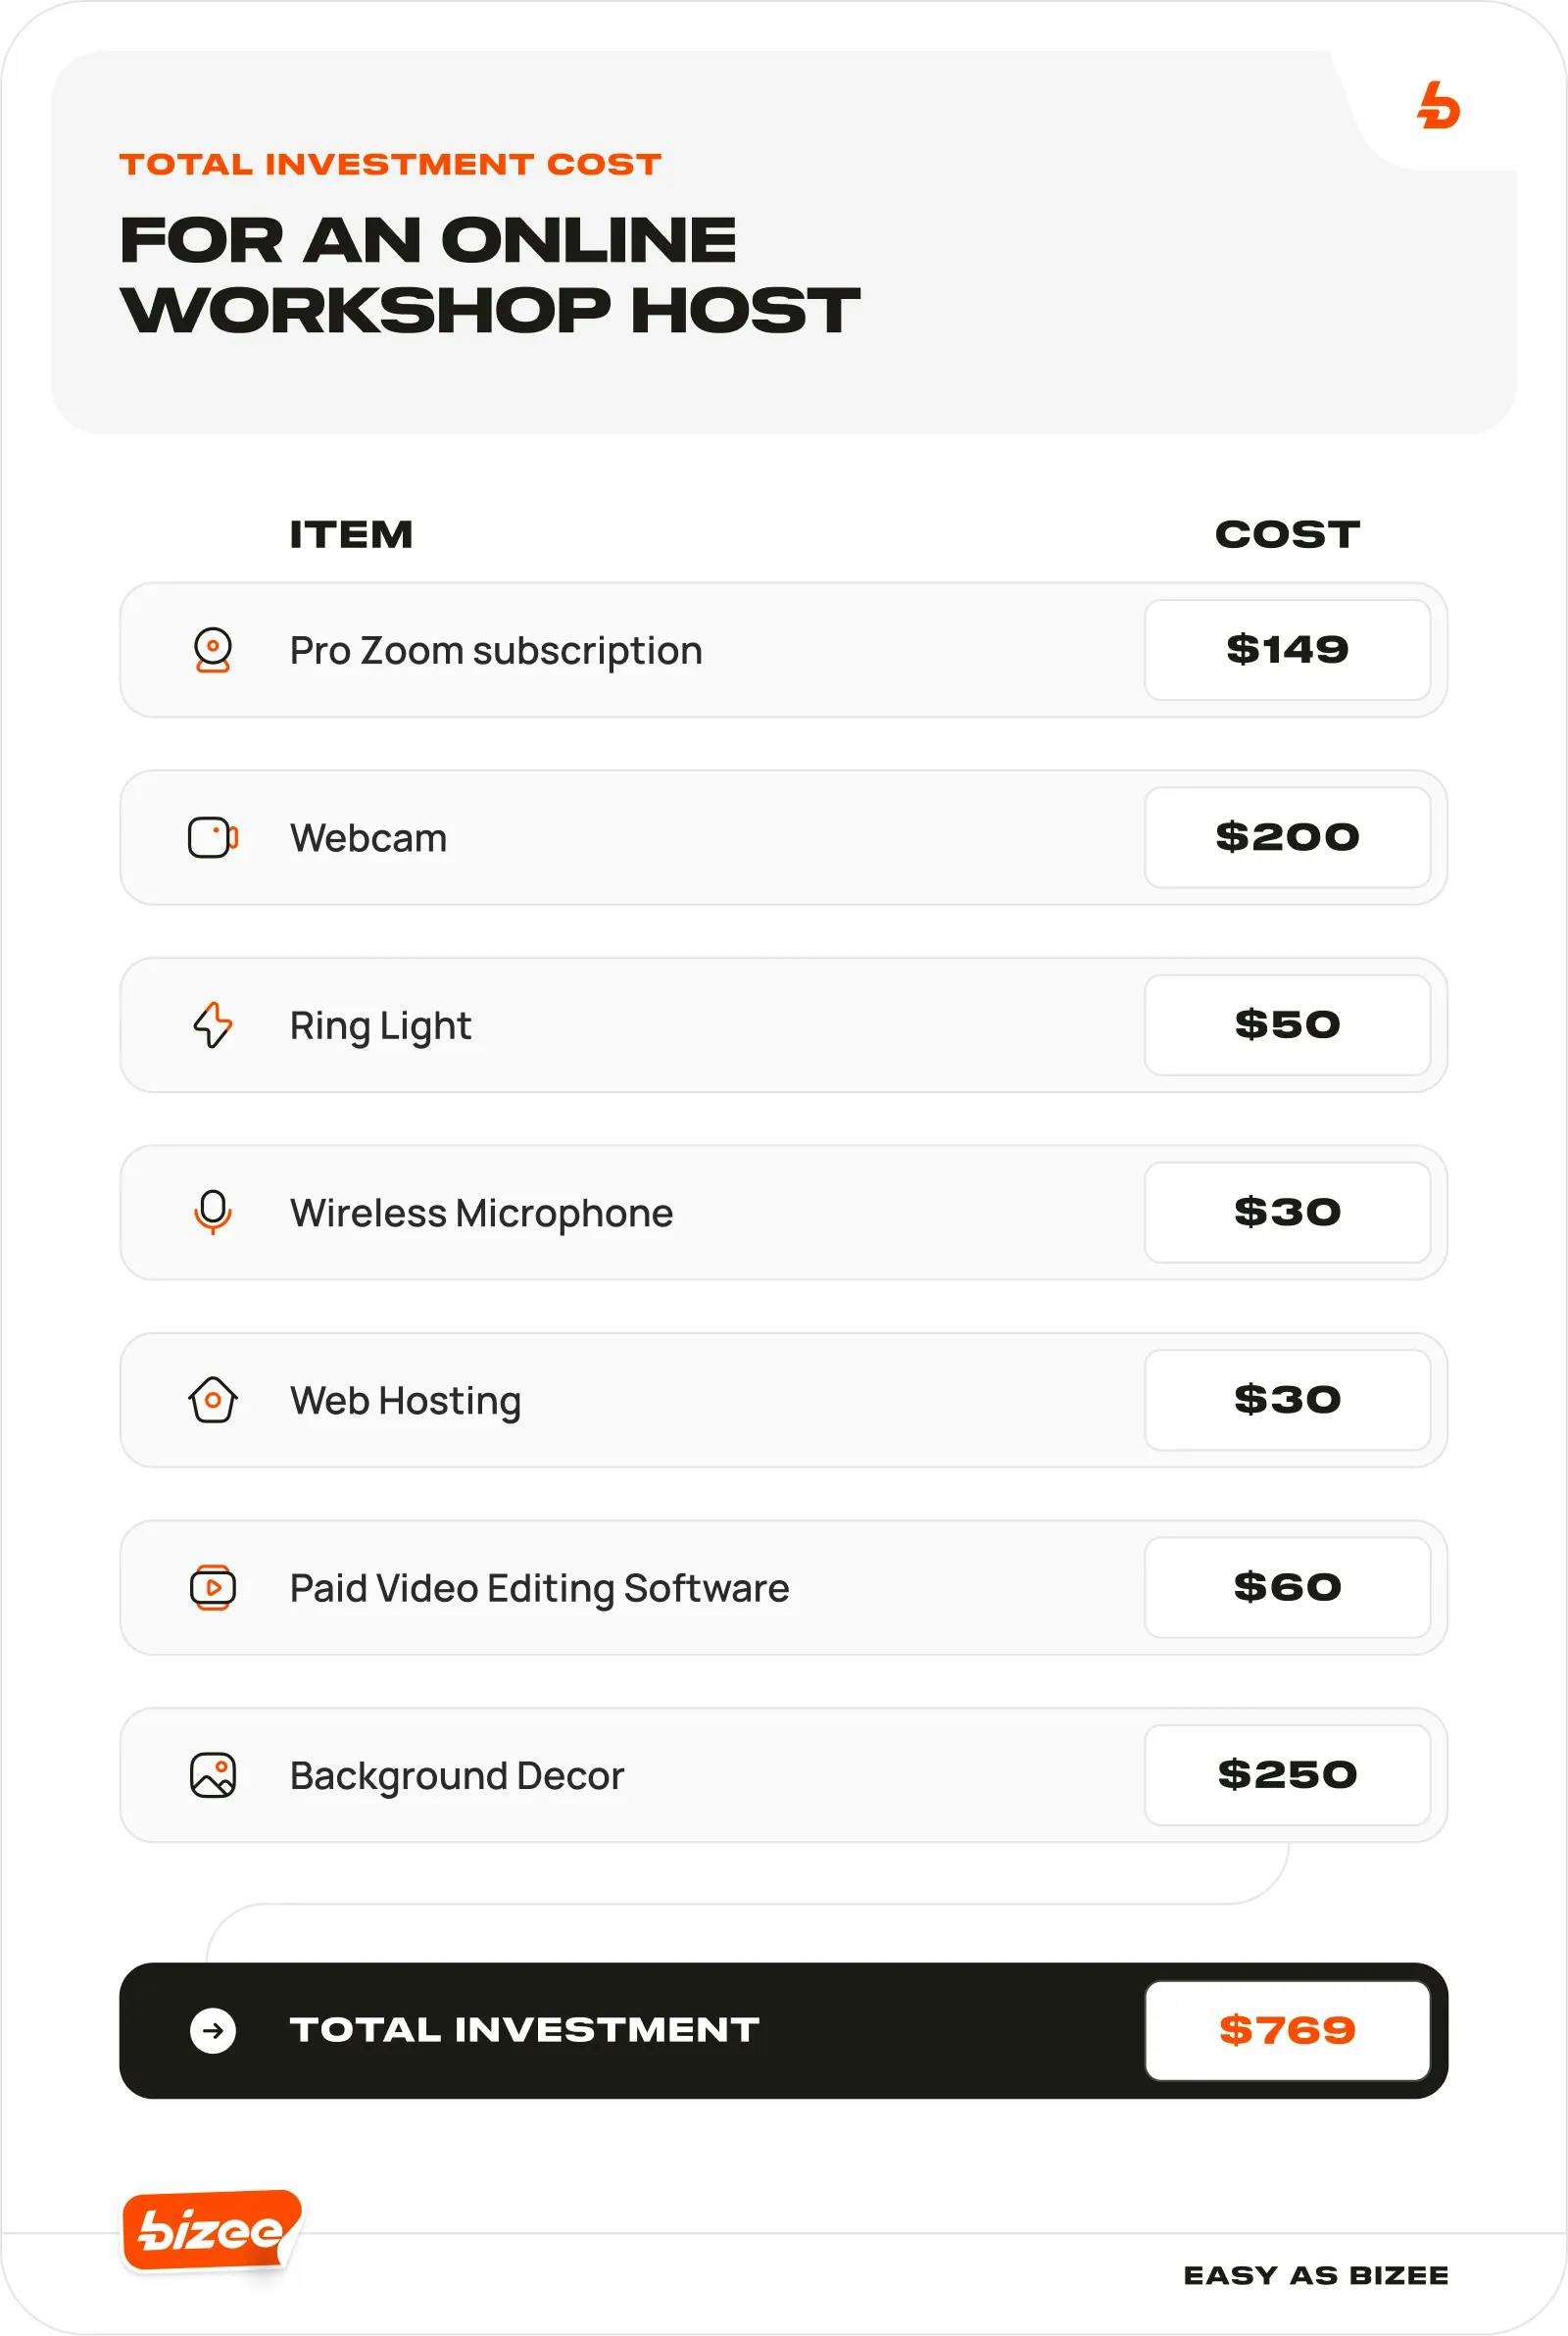 Total investment cost for an online workshop host. Pro Zoom subscription: $149, webcam $200, ring light $50,  microphone $30, web hosting $30, video editing software $60, background decor: $250, total: $768